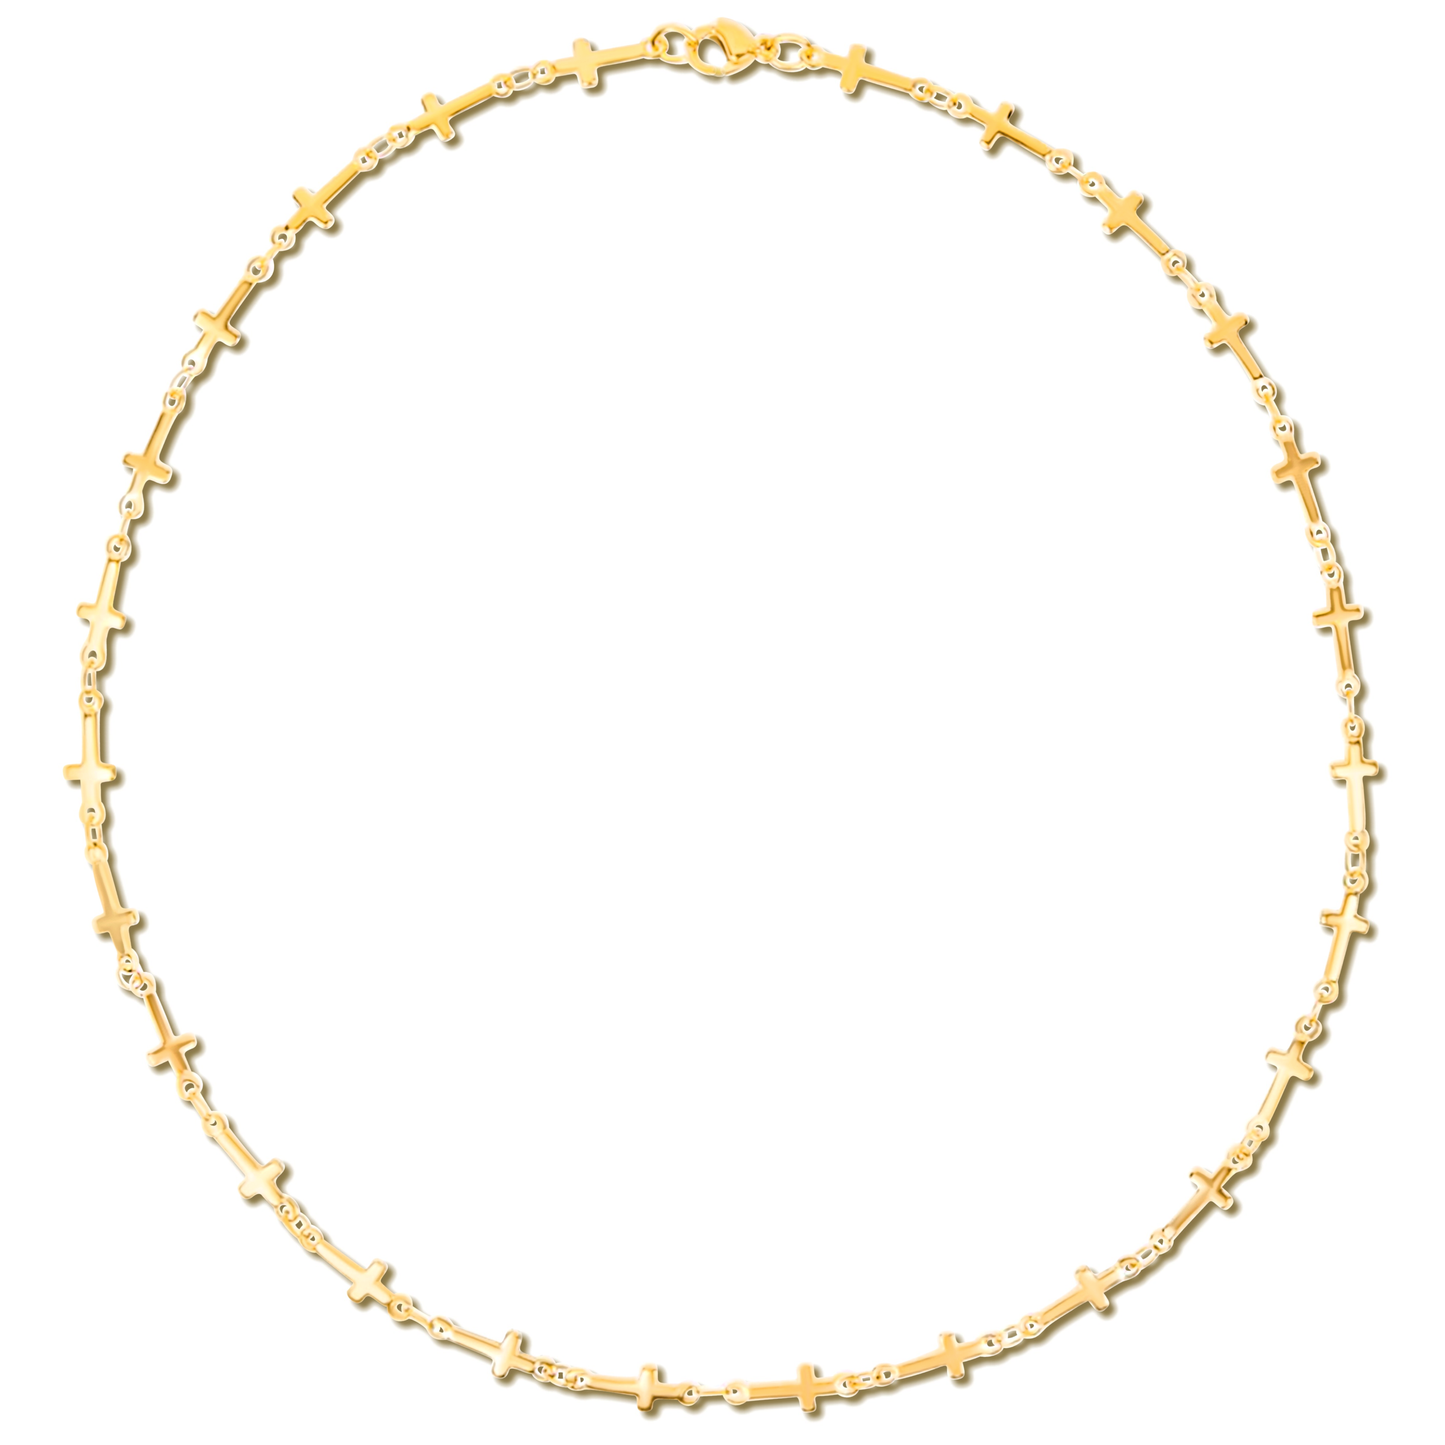 Ellie Vail - Kennedy Cross Chain Necklace